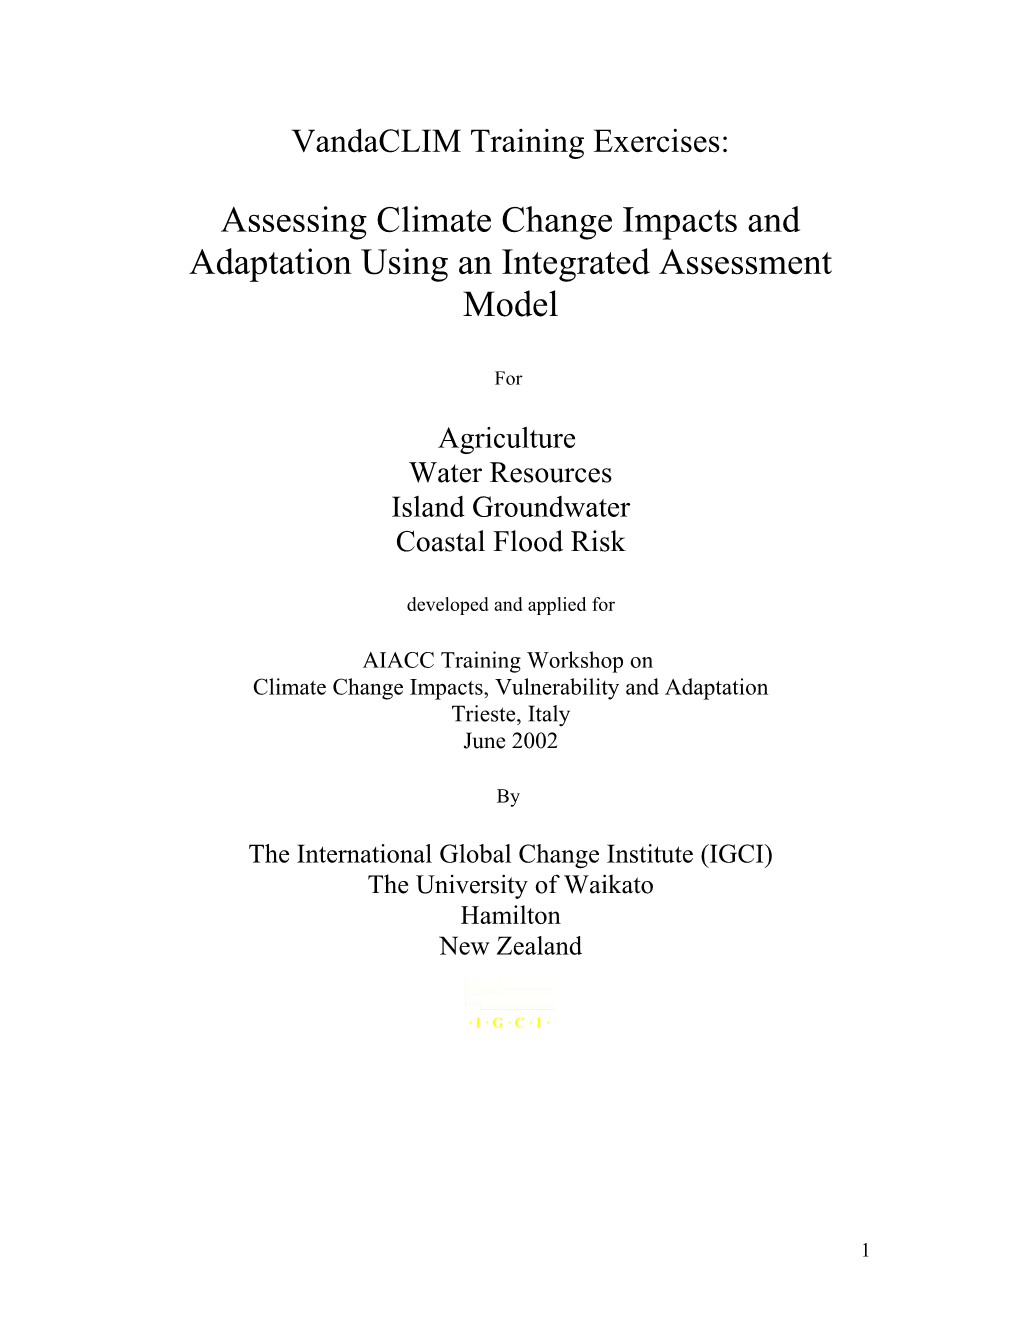 Assessing Climate Change Impacts and Adaptation Using an Integrated Assessment Model